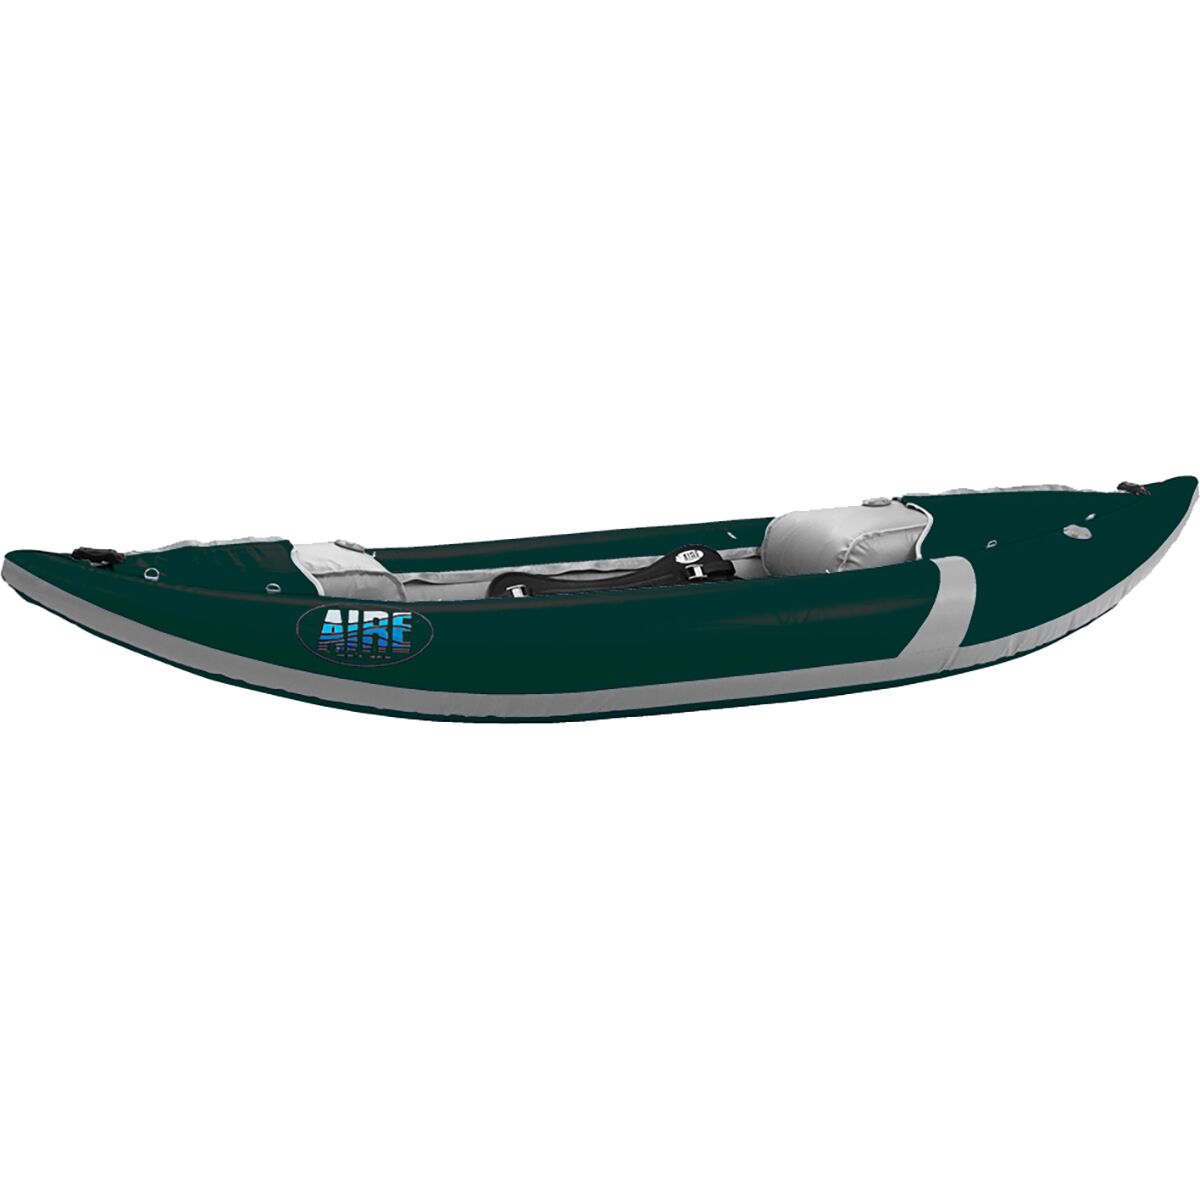 Aire Force Inflatable Kayak